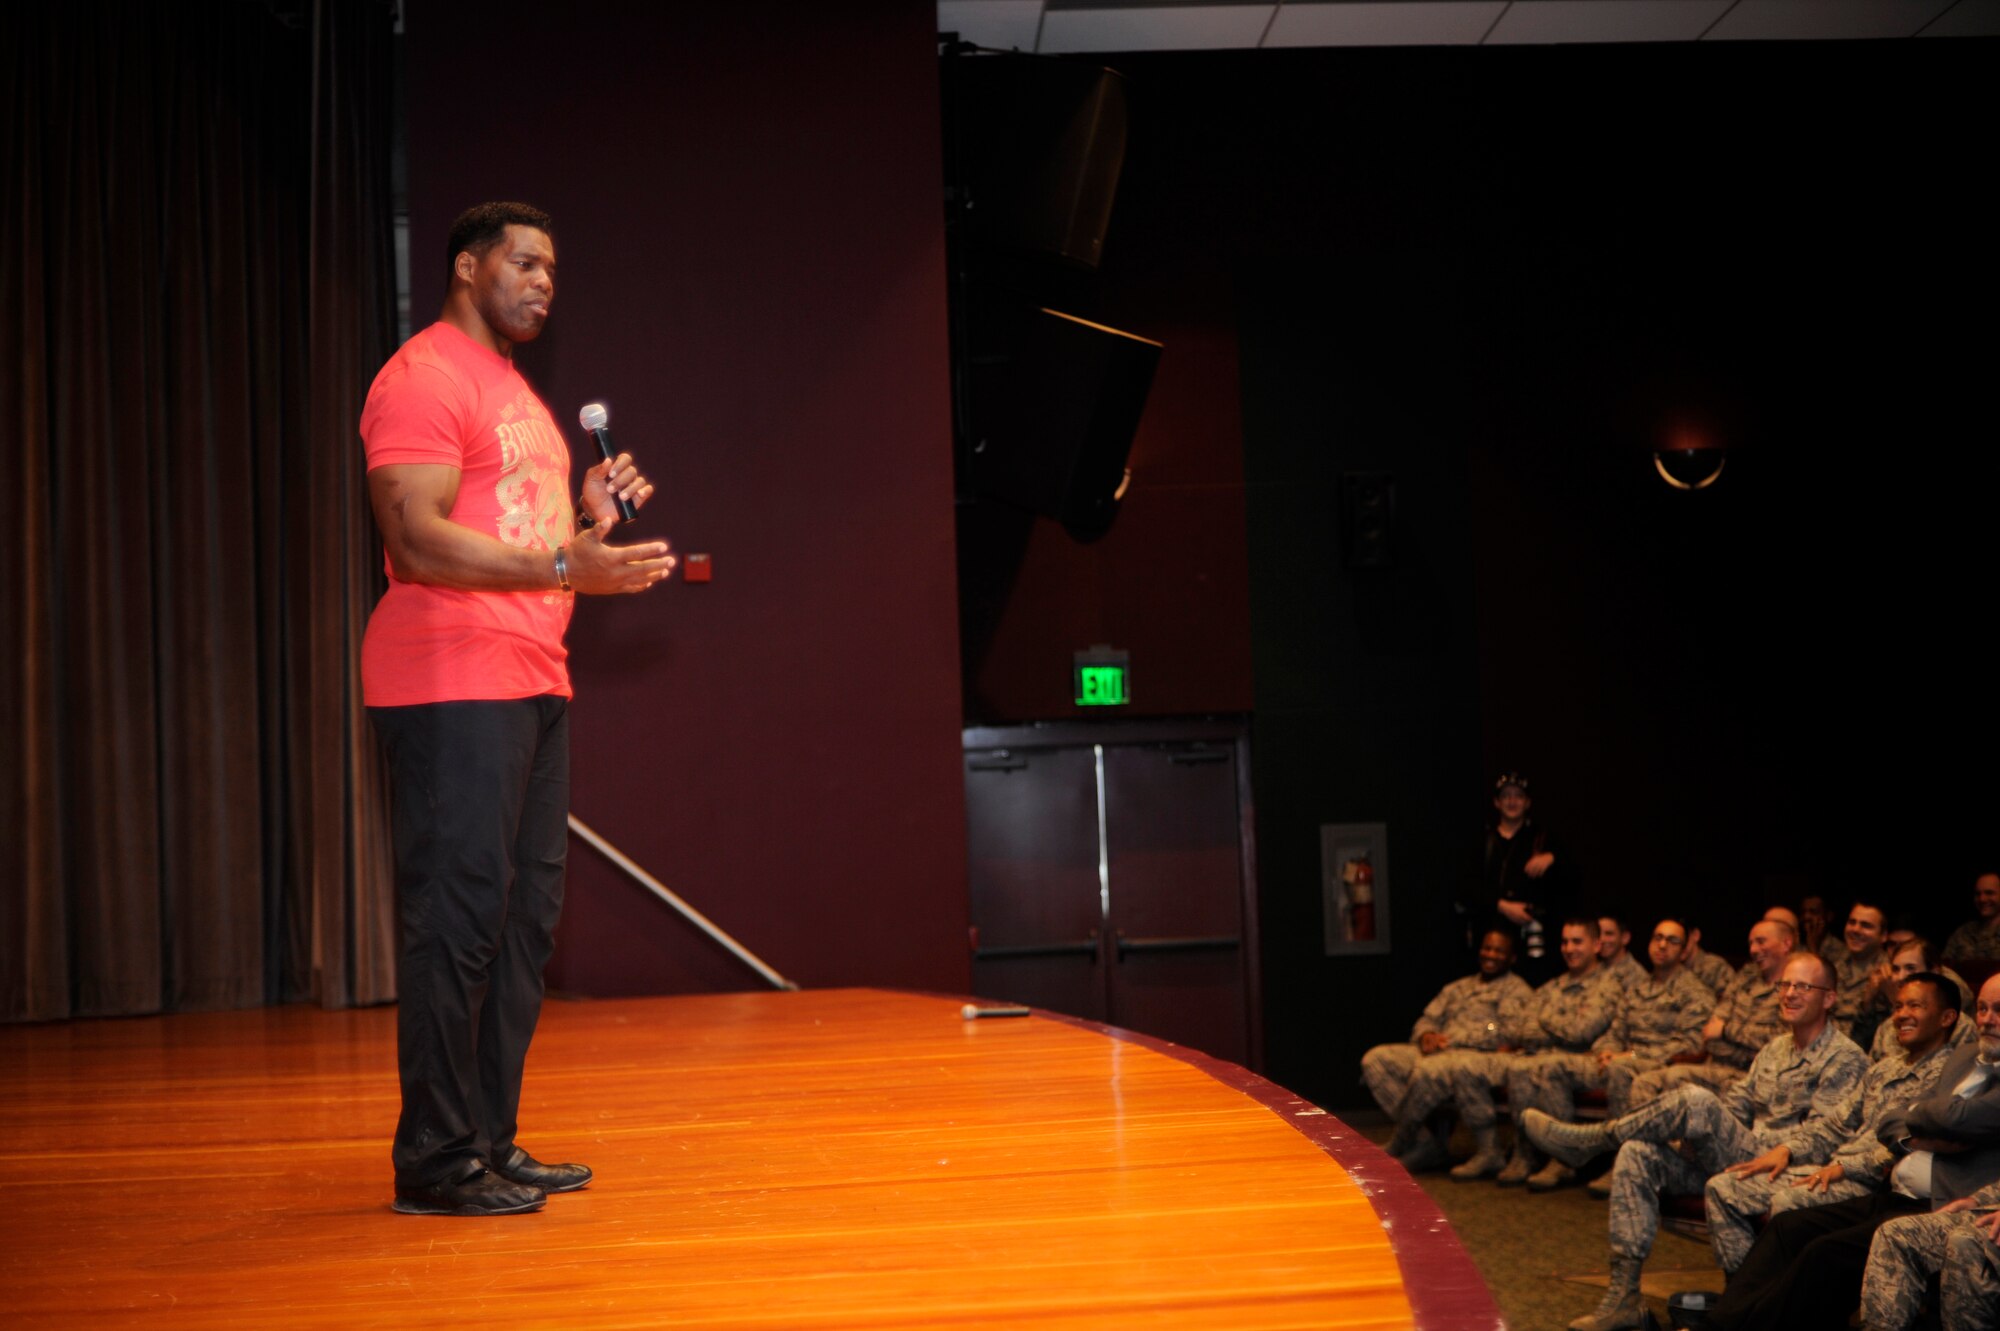 Herschel Walker, professional athlete and businessman, shares his story withTeam Vandenberg during an All Call, Jan. 21, 2015, Vandenberg Air Force Base, Calif. Walker visits military installations to share his personal story and raise unit morale. (U.S. Air Force photo by Staff Sgt. Jim Araos/Released)